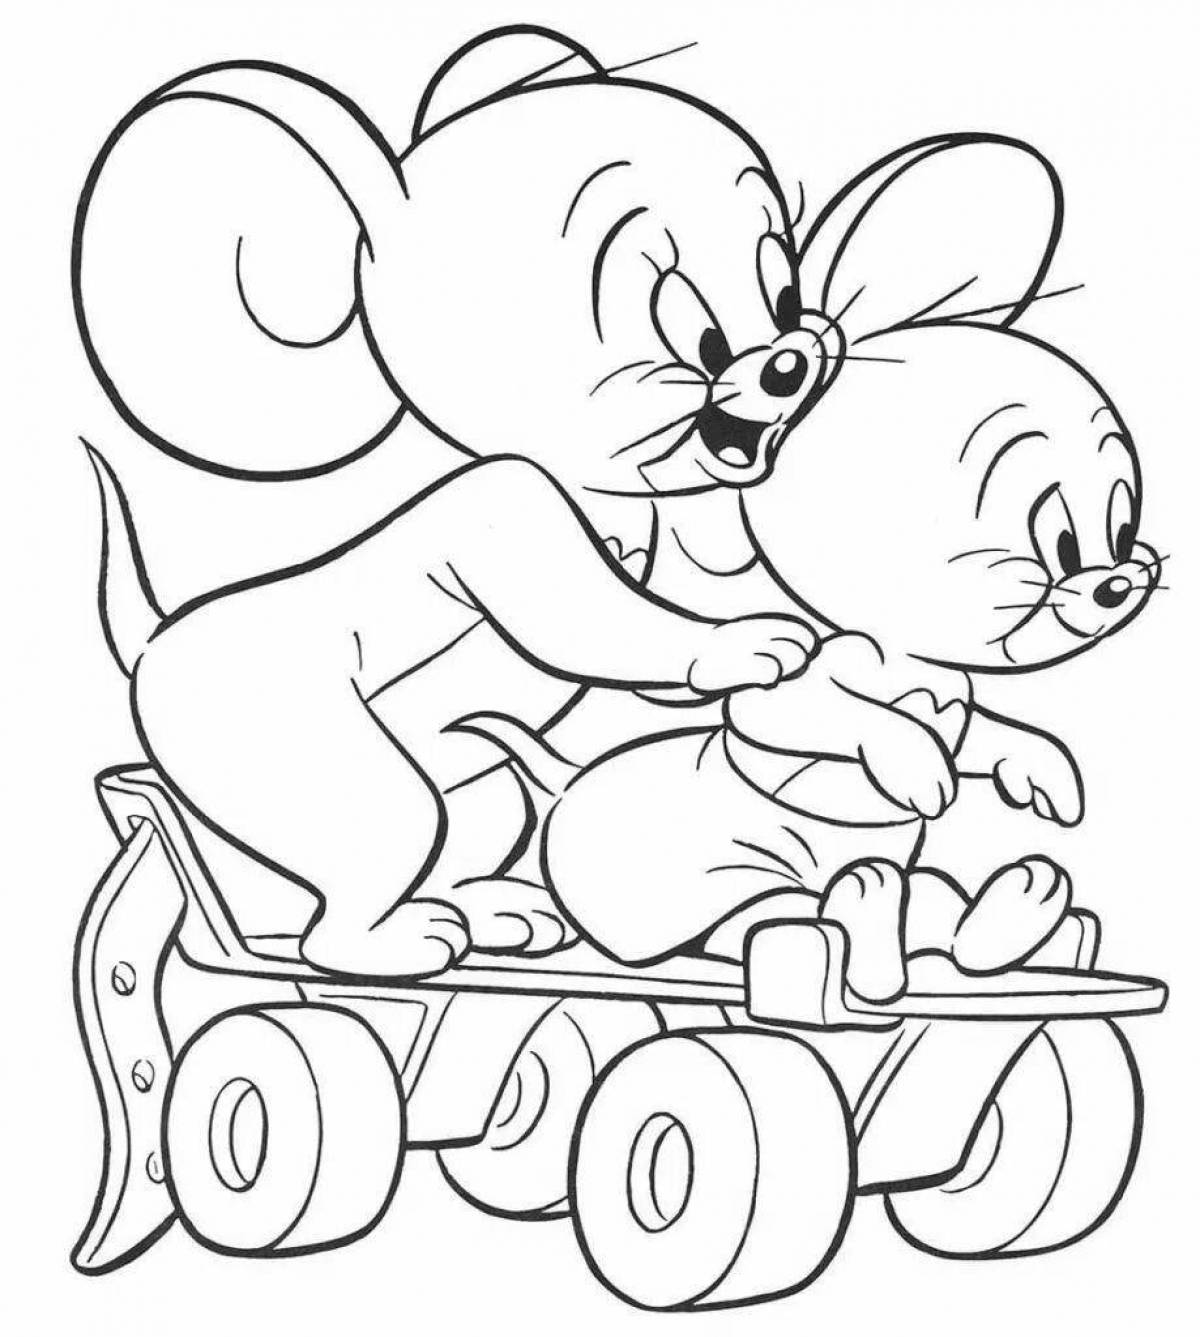 Archive of bright coloring pages for children